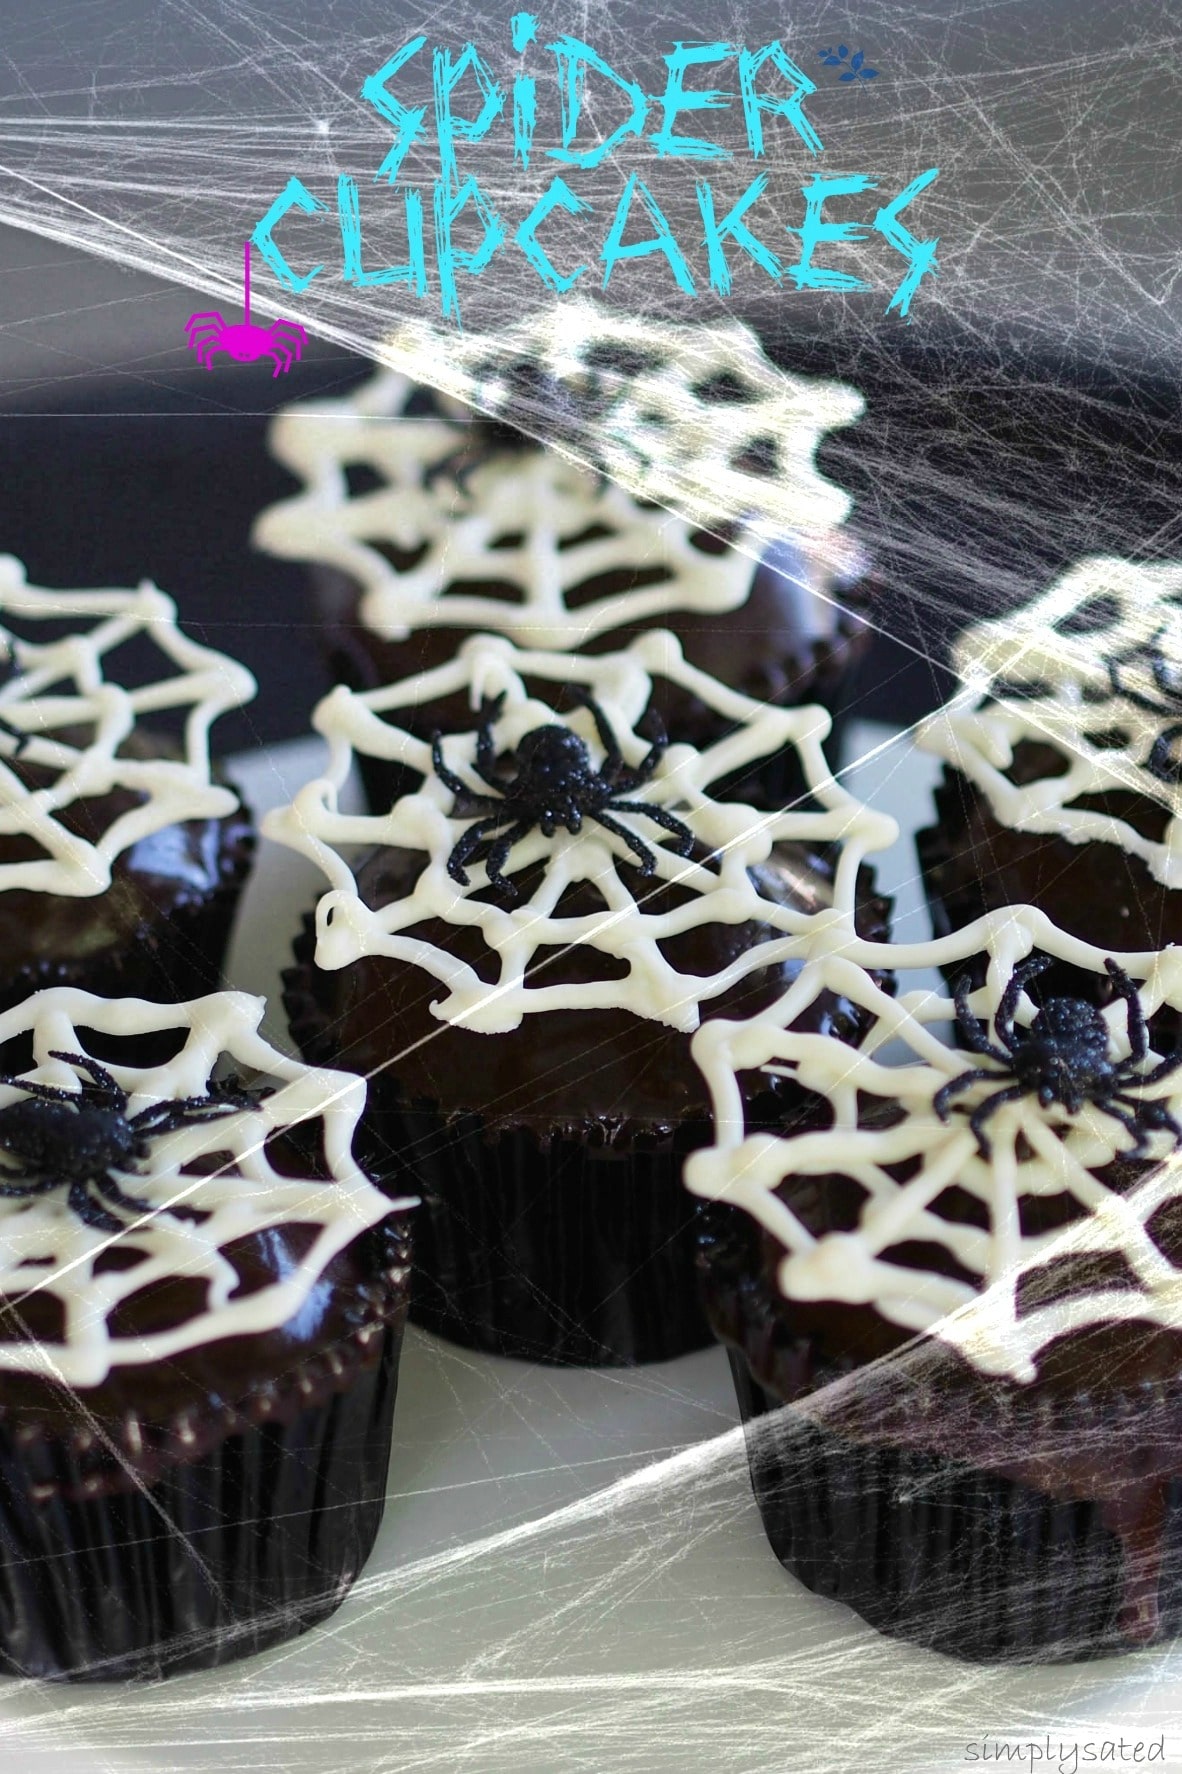 Spider Cupcake; use box cake mix & canned icing to make this easy & creepy, crawly Halloween treat. simplysated